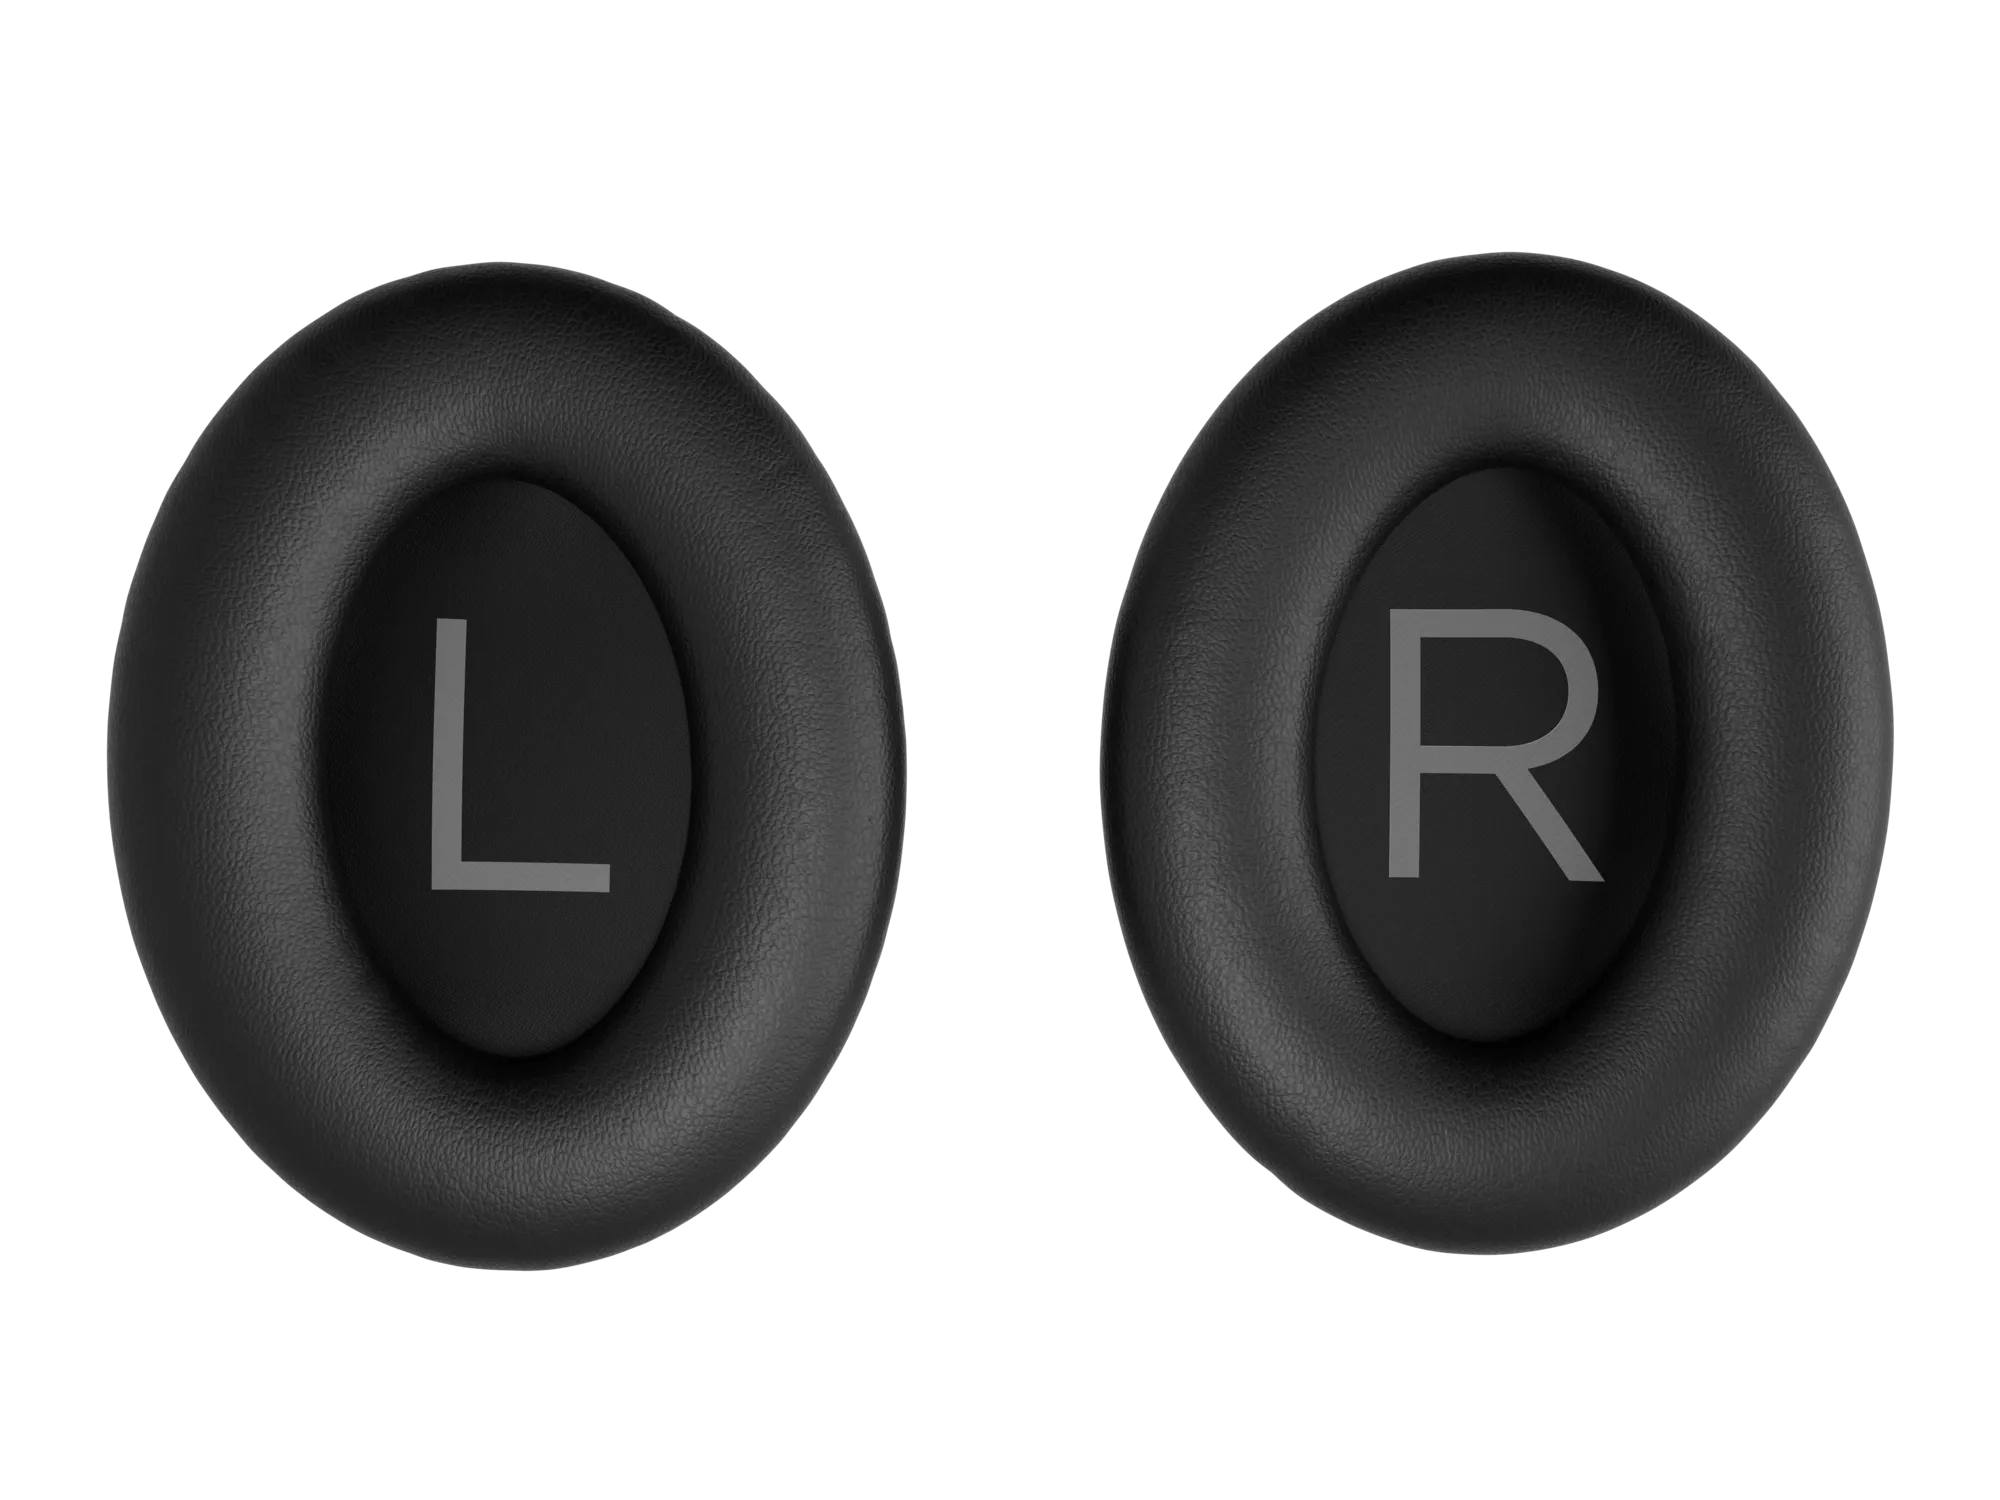  AHG Premium QC45 replacement ear pads cushions compatible with  Bose QuietComfort 45/Bose QC45 noise cancelling headphones. Premium Protein  Leather, Extra Thick High-Density Foam & Durable (QC45-BLACK) : Electronics